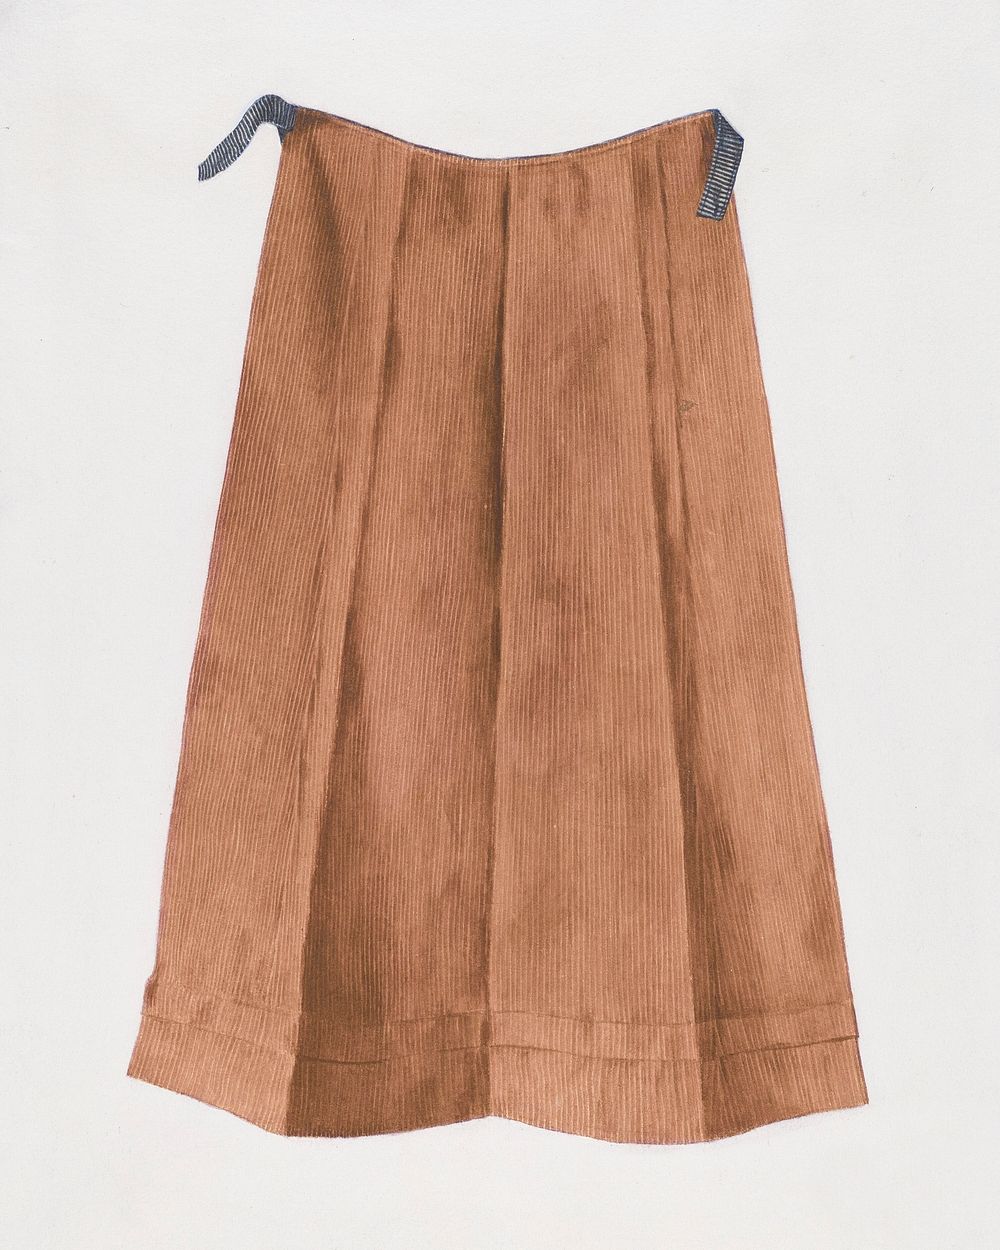 Shaker Woman's Apron (c. 1936) by Betty Fuerst. Original from The National Gallery of Art. Digitally enhanced by rawpixel.